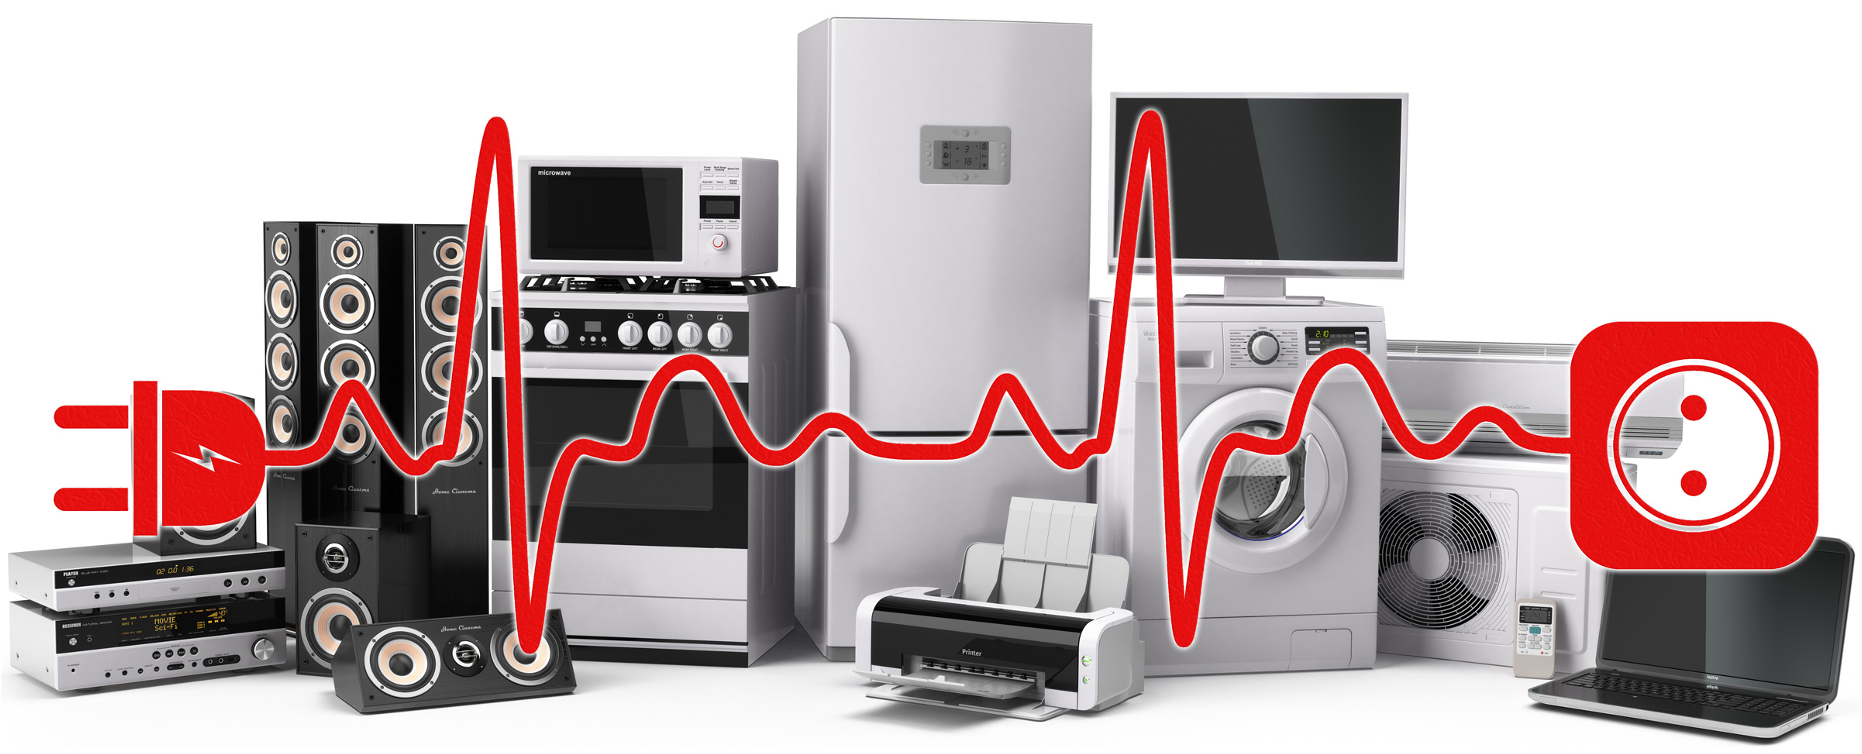 Image of common household equipment and appliances with "squiggly" line representing dirty electricity superimposed on top of the devices